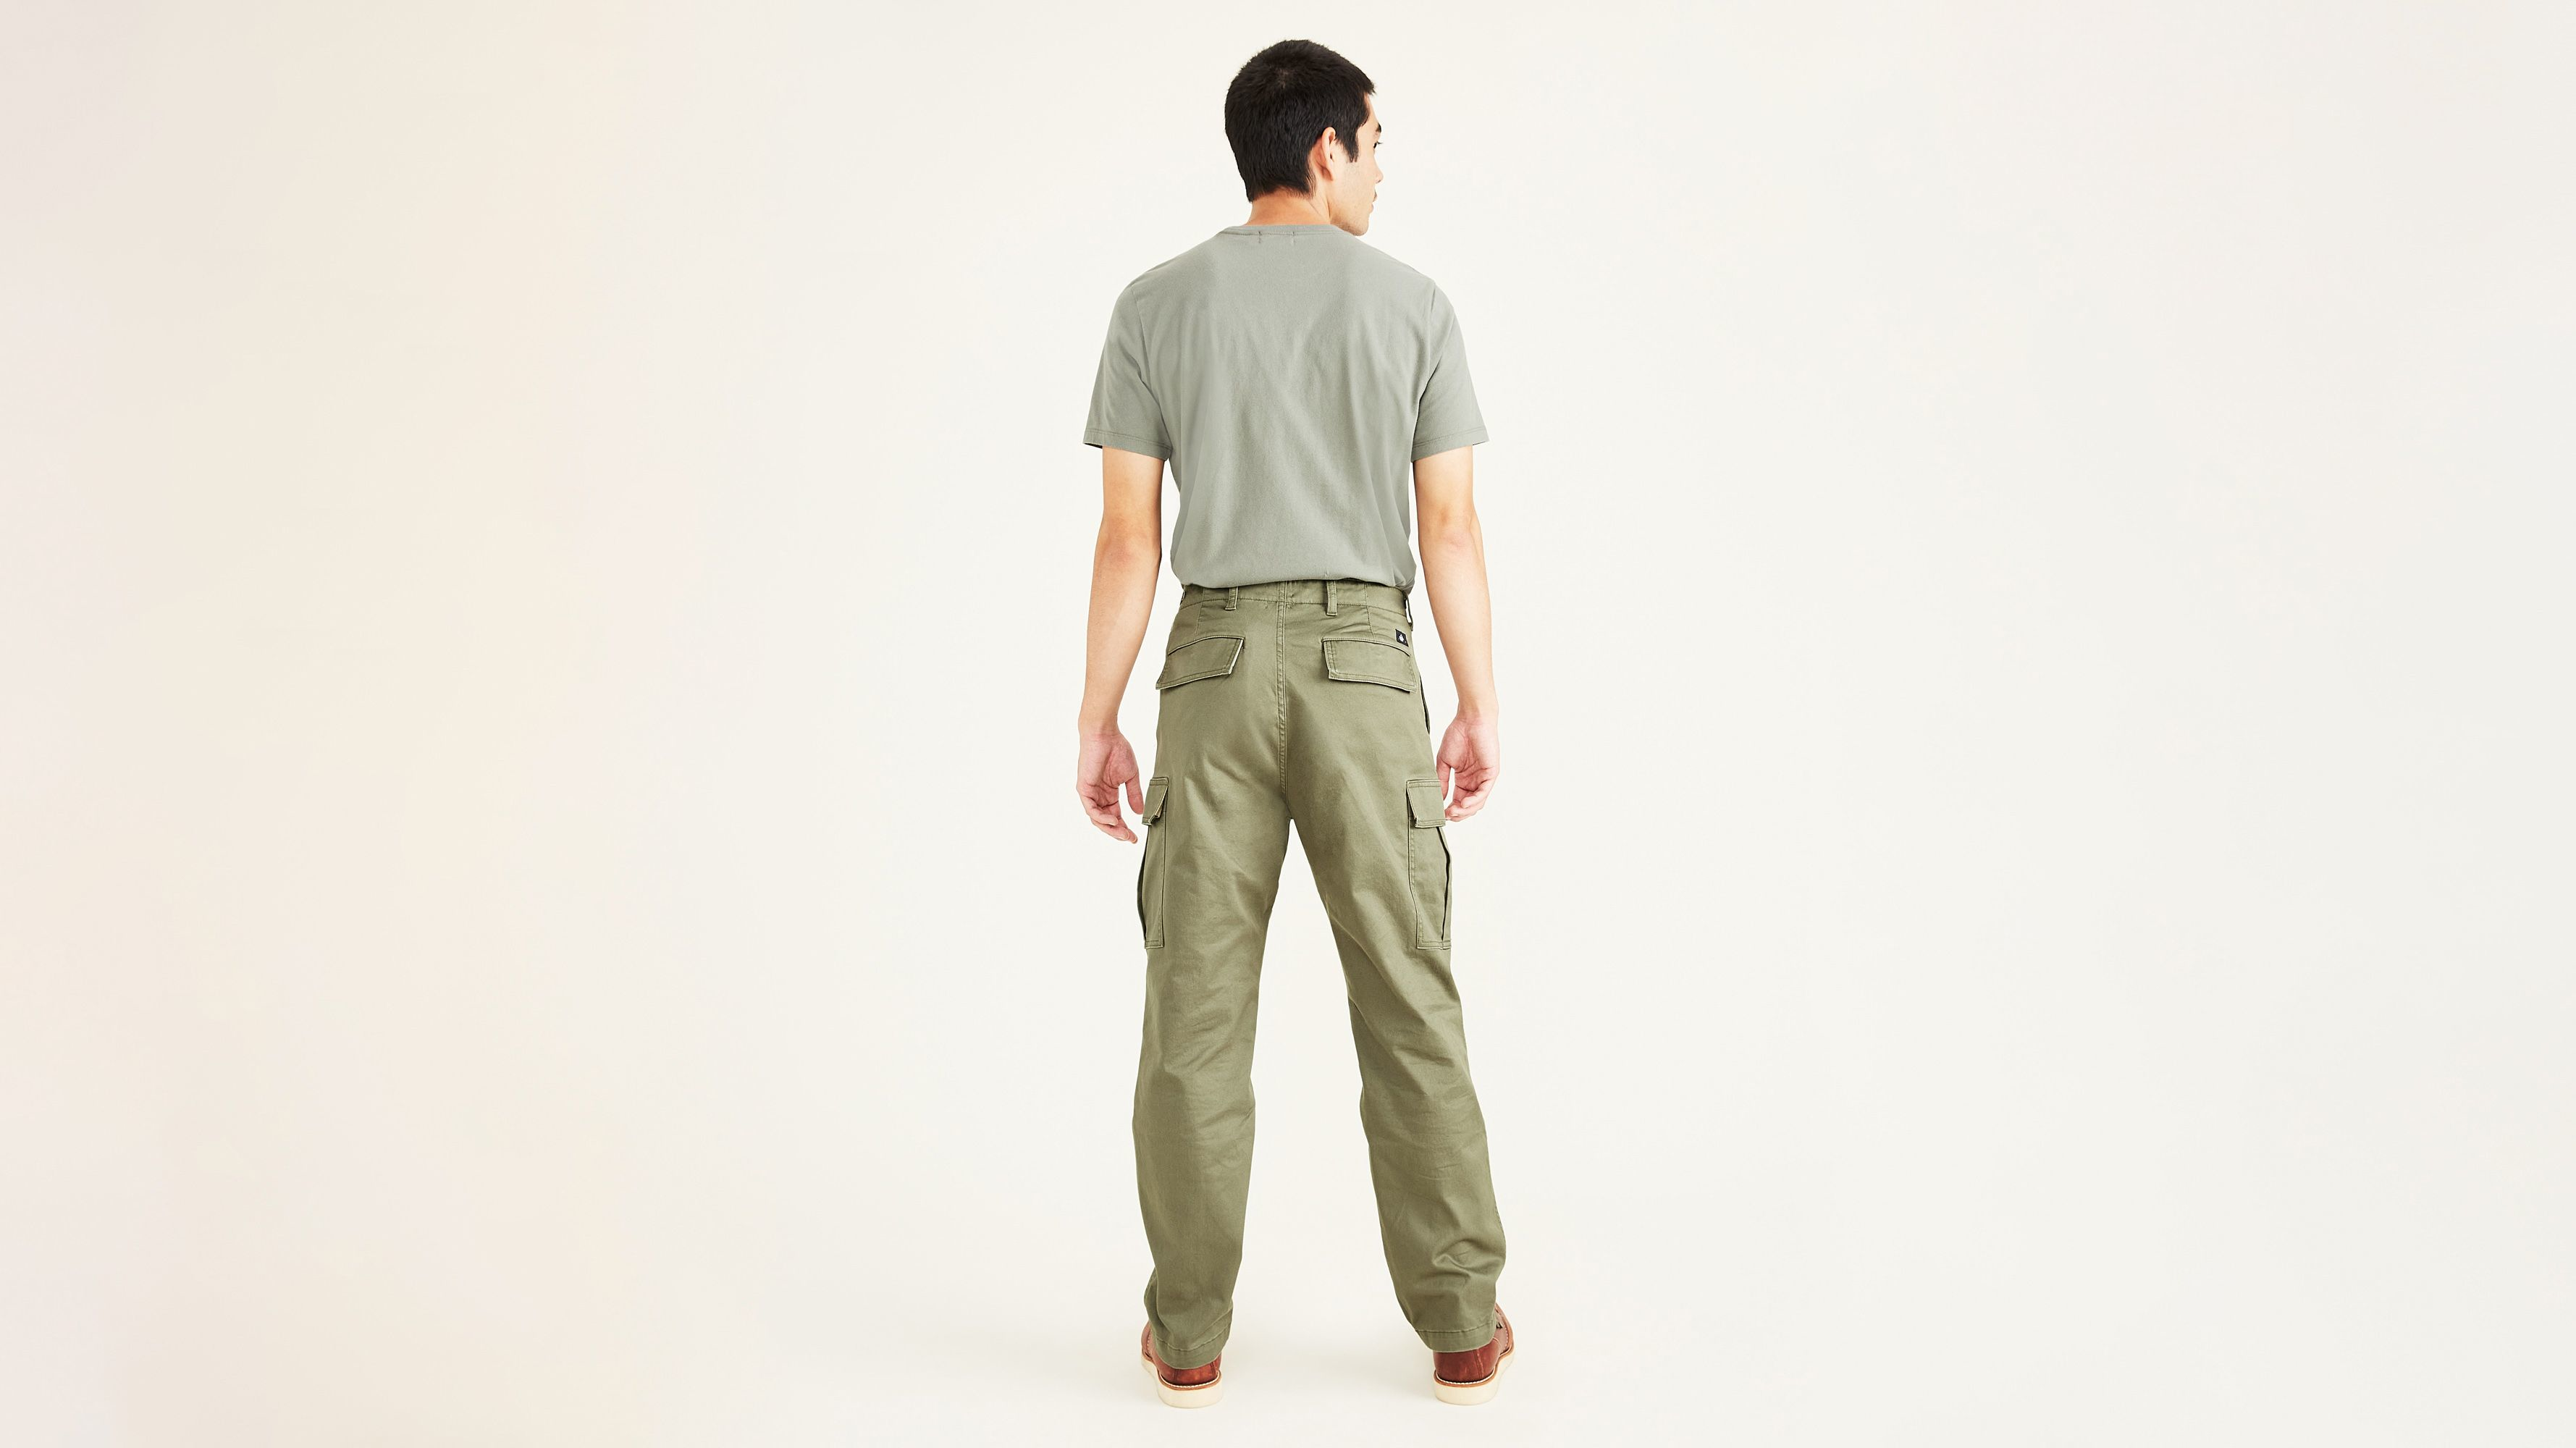 Men's Camouflage Cargo Pants, Stretchable Trousers With 6 Pockets - 30 /  Camouflage